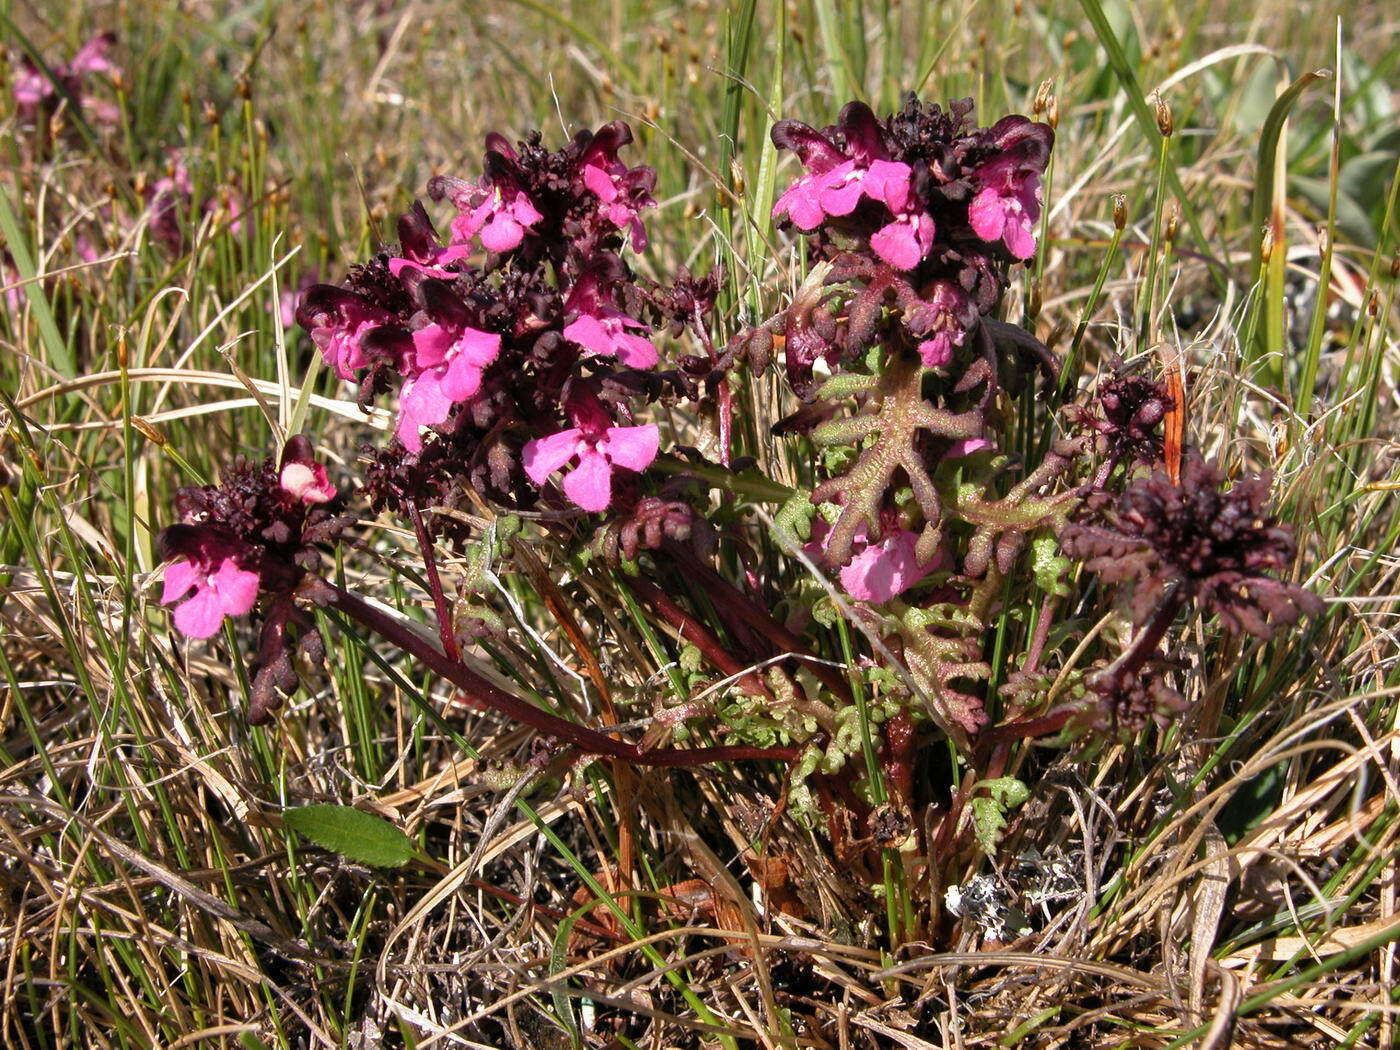 Image of Pennell's lousewort